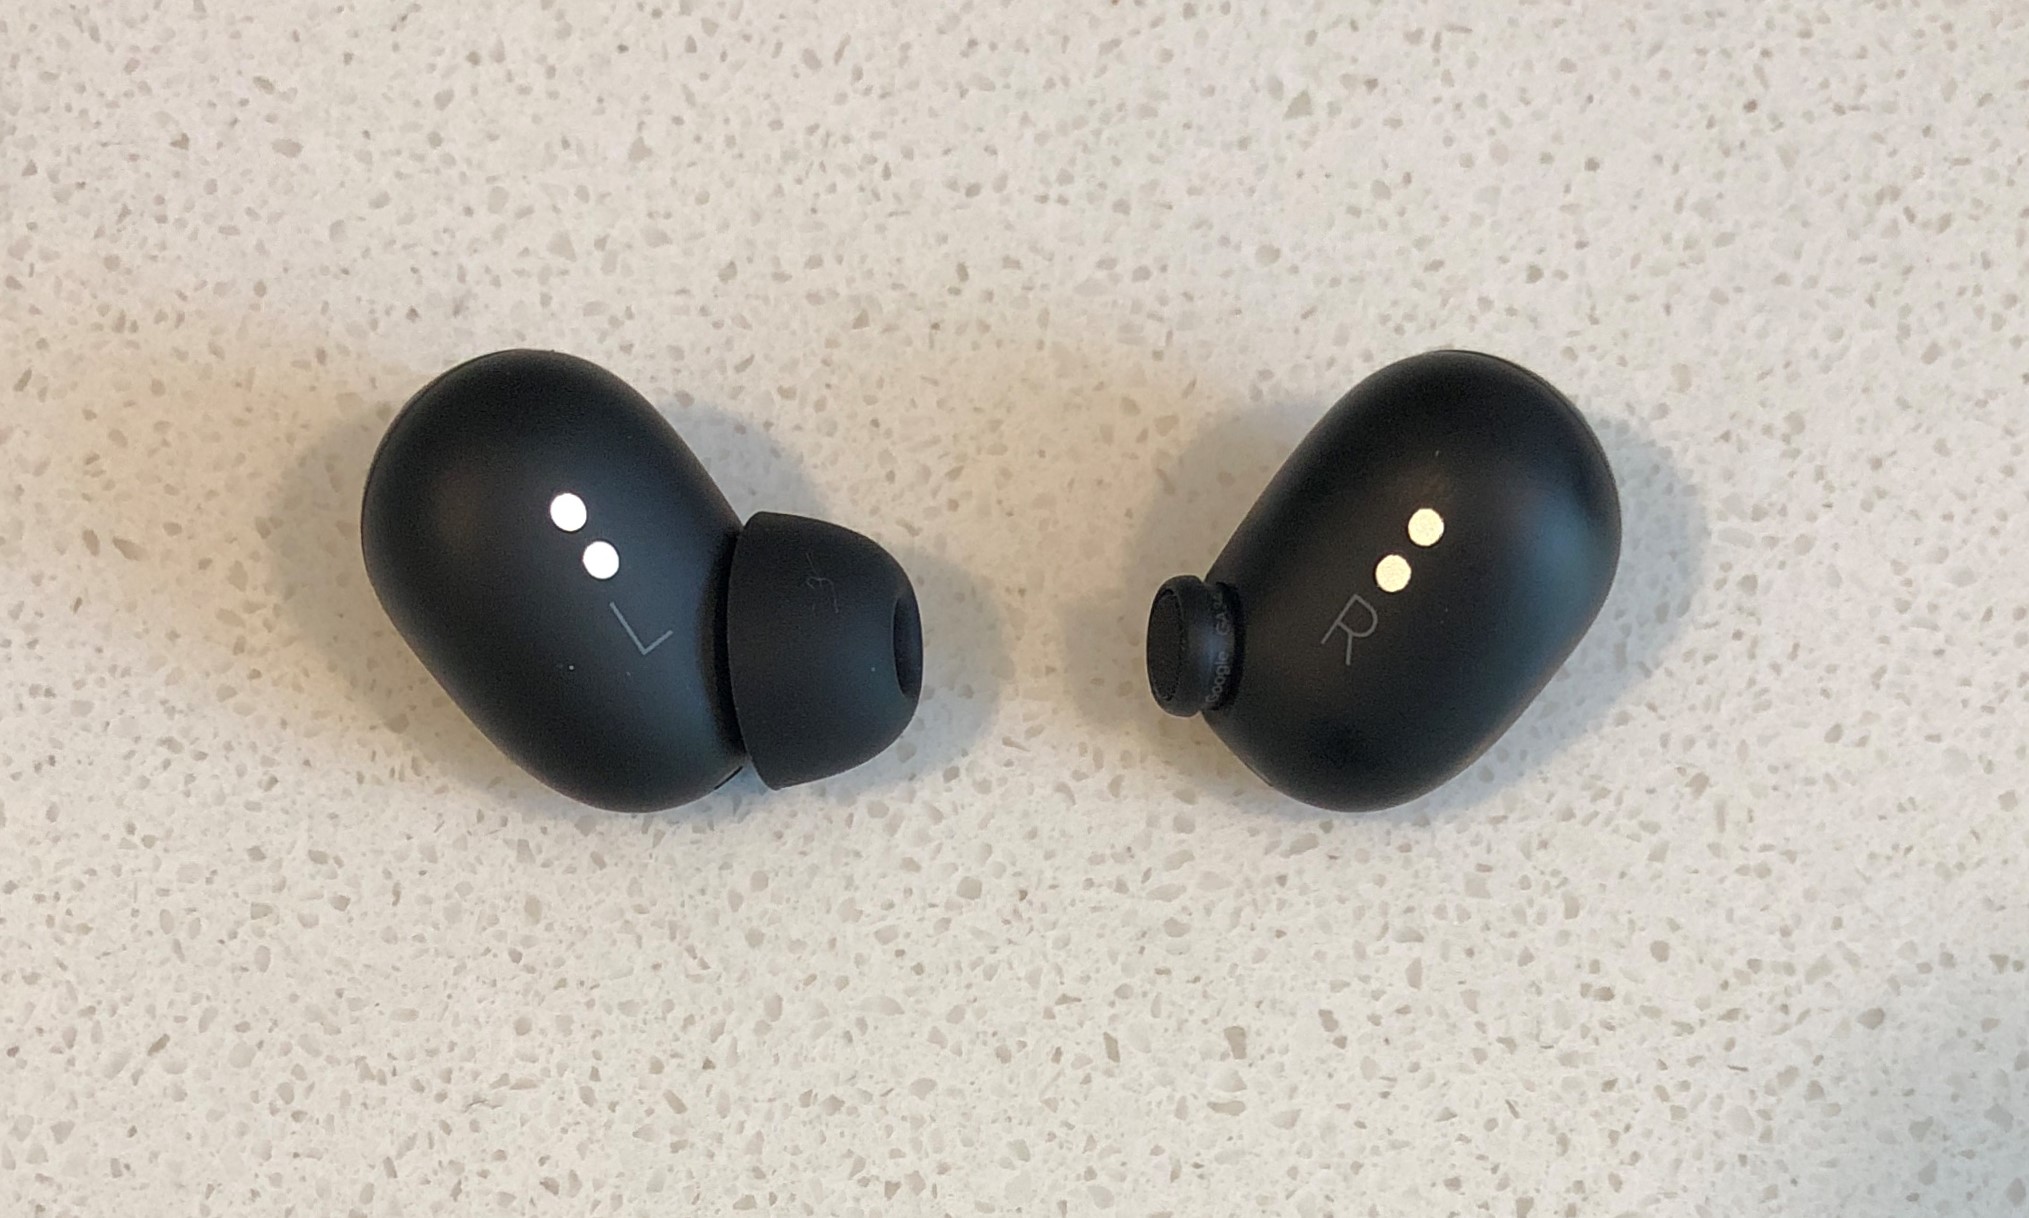 Google Pixel Buds Pro tip and nozzle